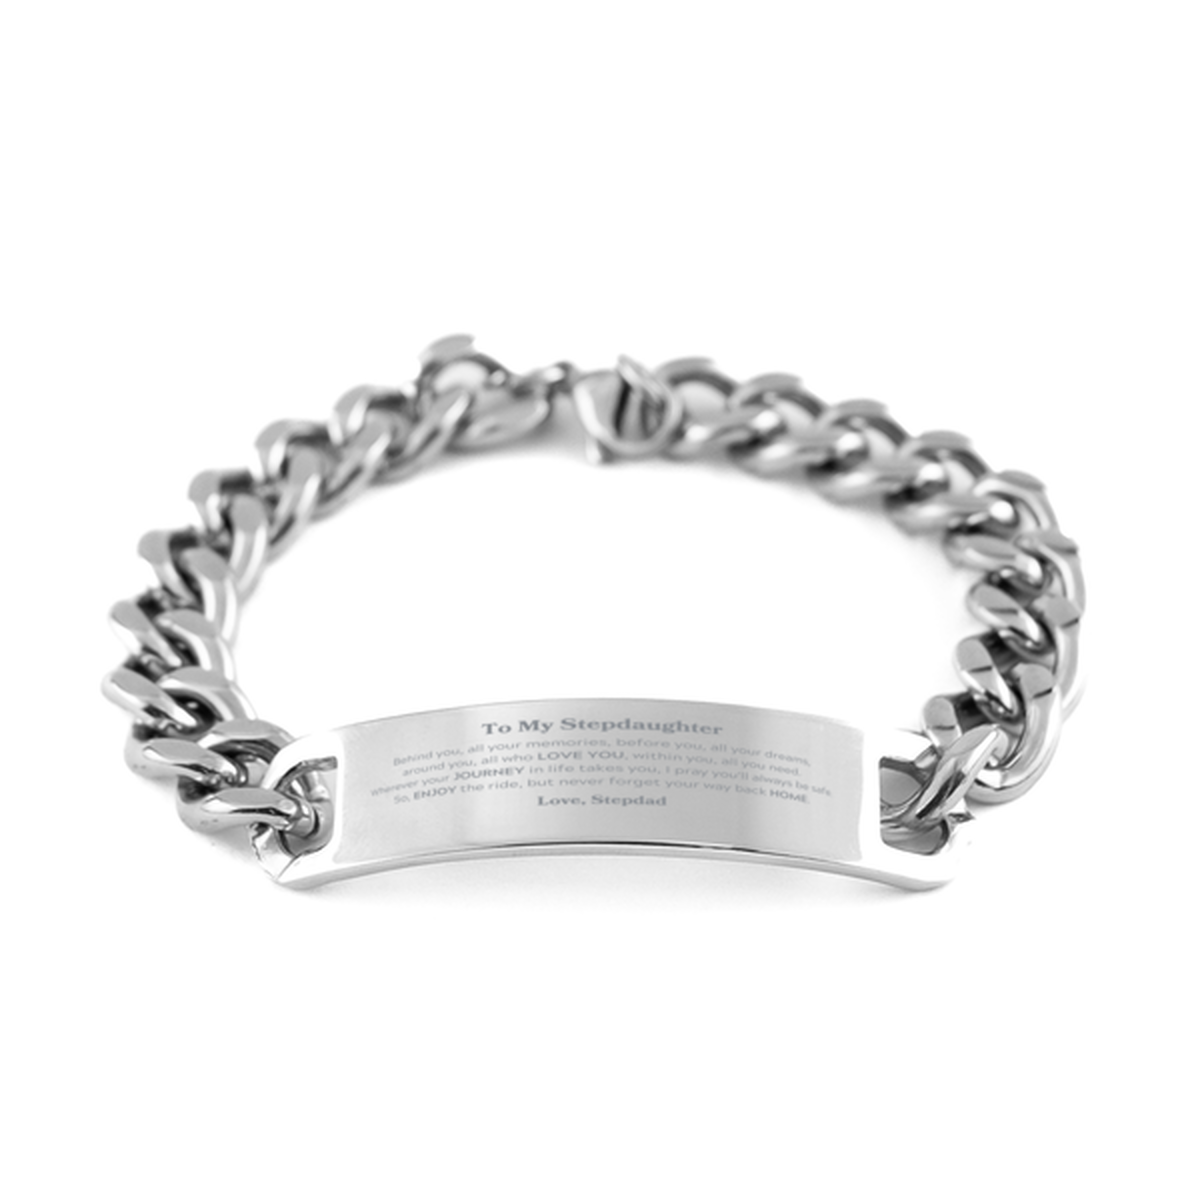 To My Stepdaughter Graduation Gifts from Stepdad, Stepdaughter Cuban Chain Stainless Steel Bracelet Christmas Birthday Gifts for Stepdaughter Behind you, all your memories, before you, all your dreams. Love, Stepdad